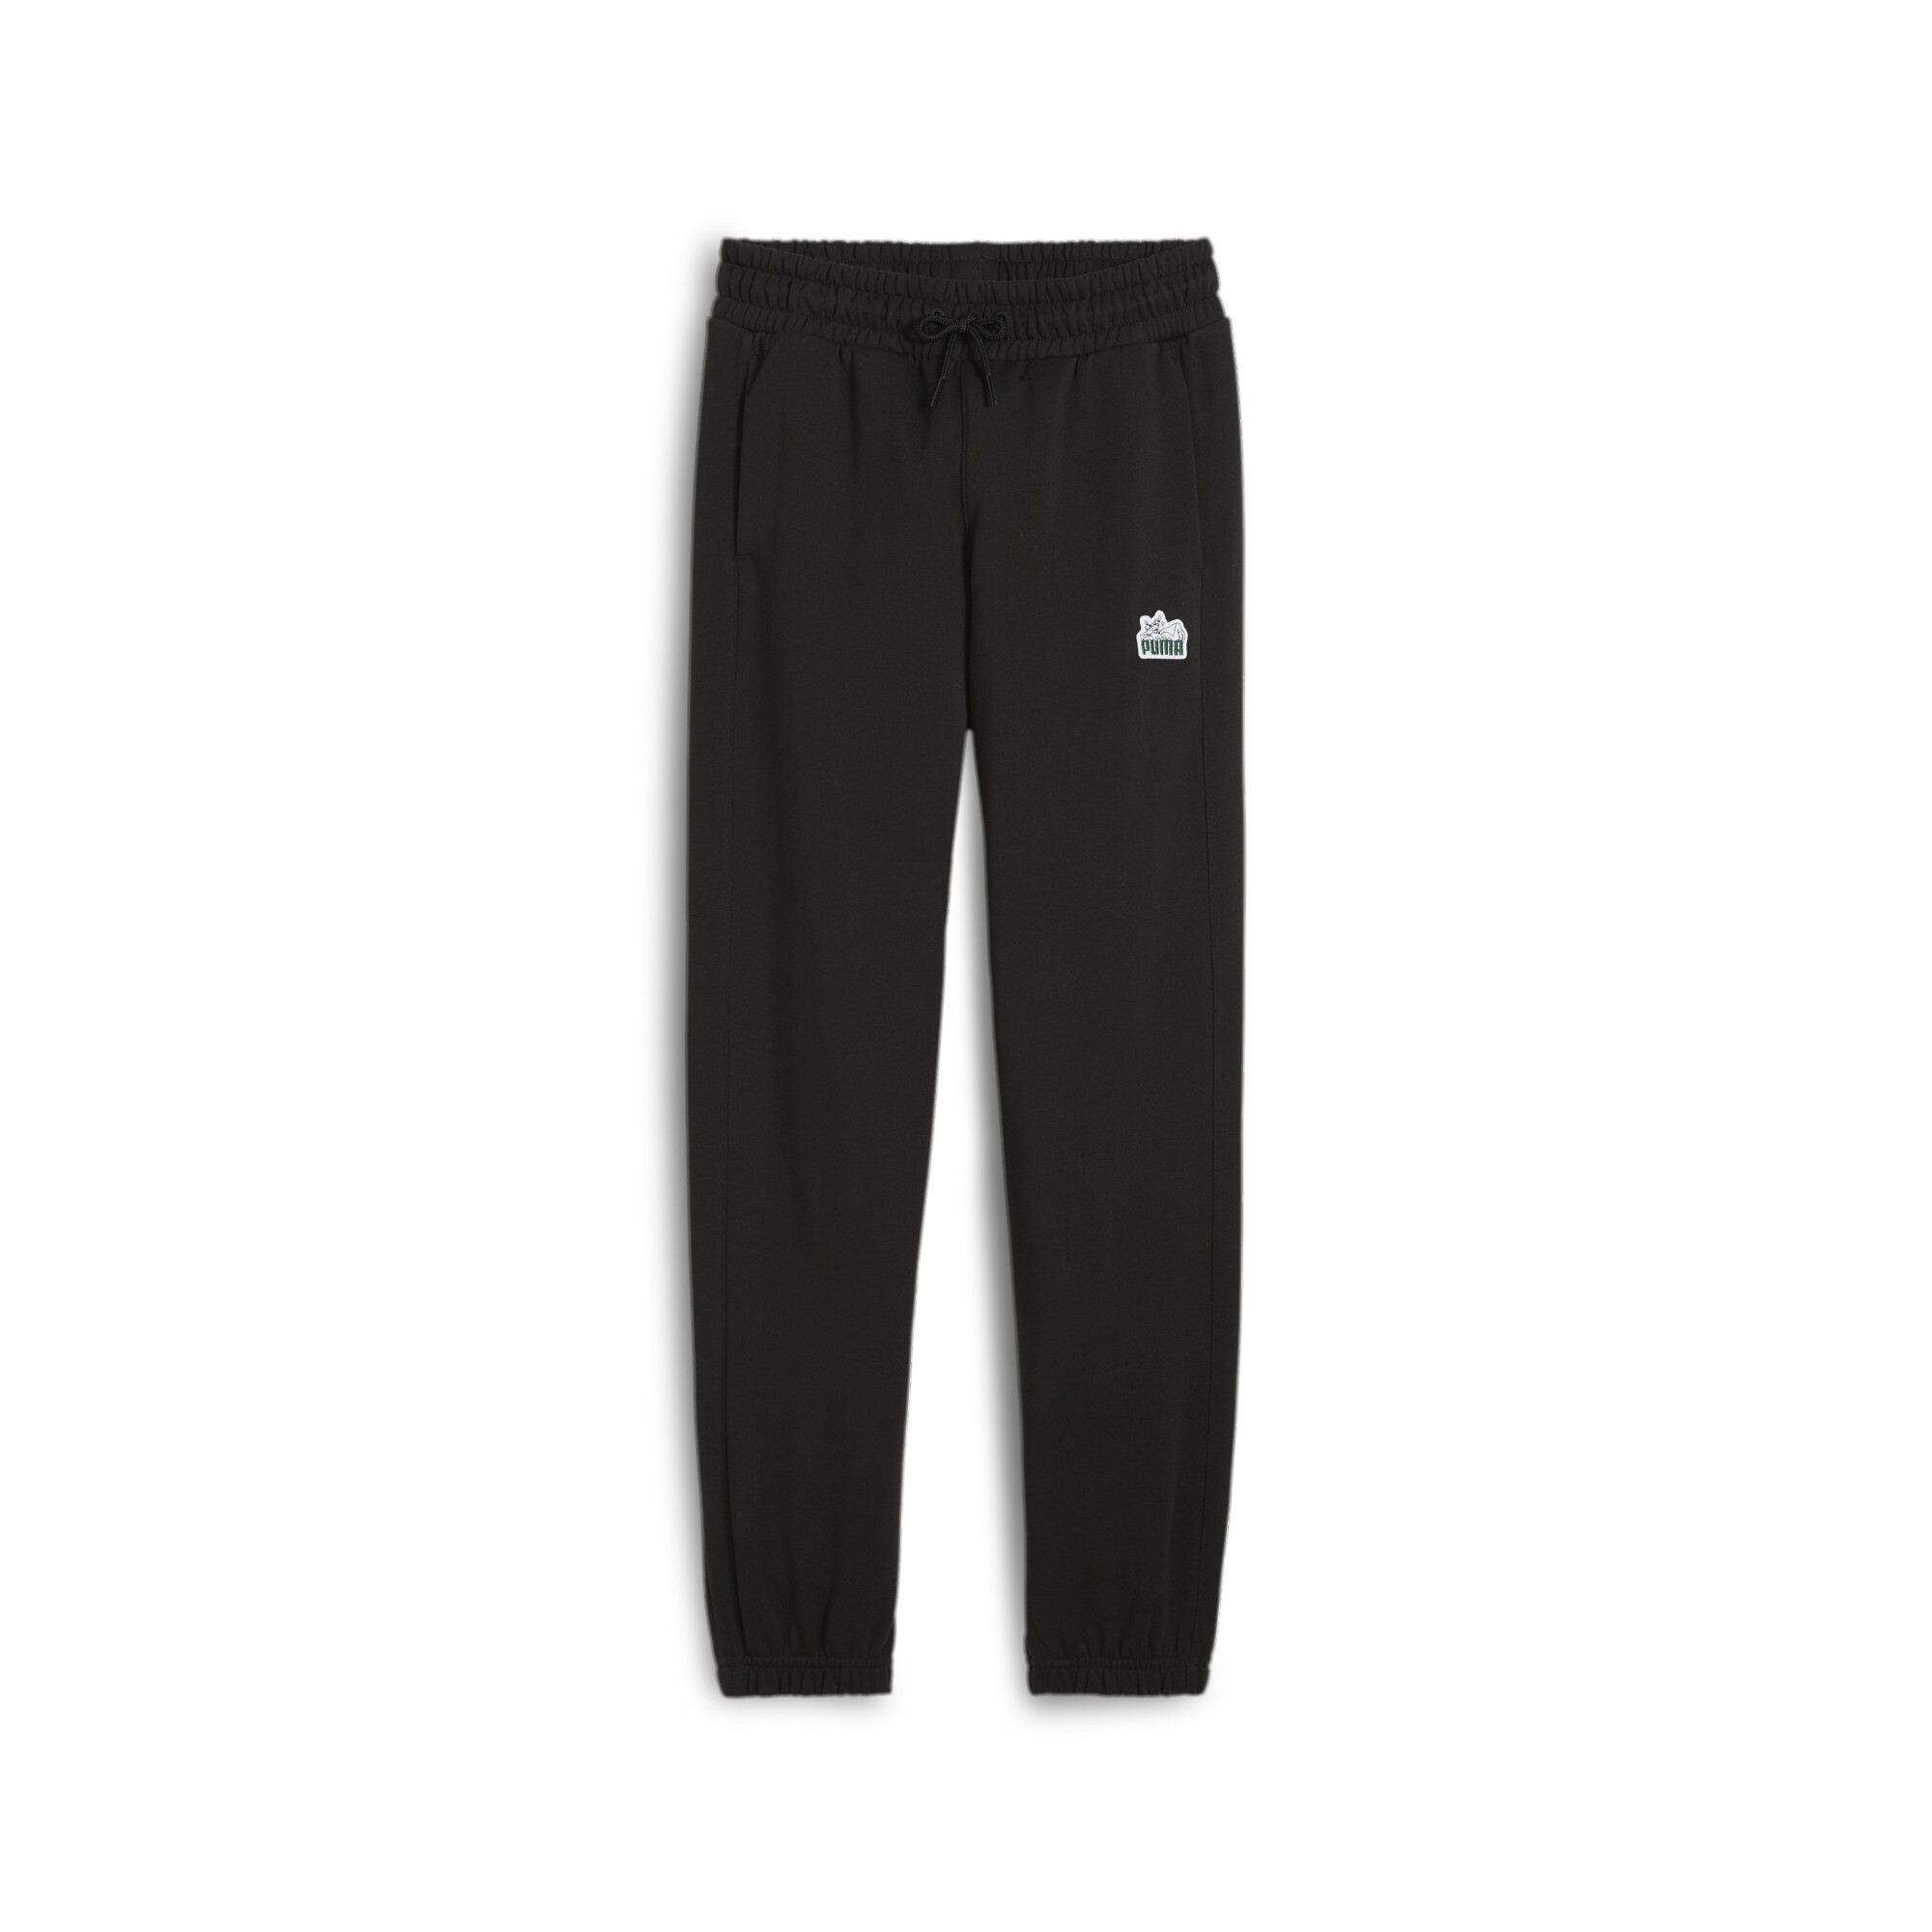 PUMA FOR THE FANBASE Sweatpants In Black, Size 13-14 Youth